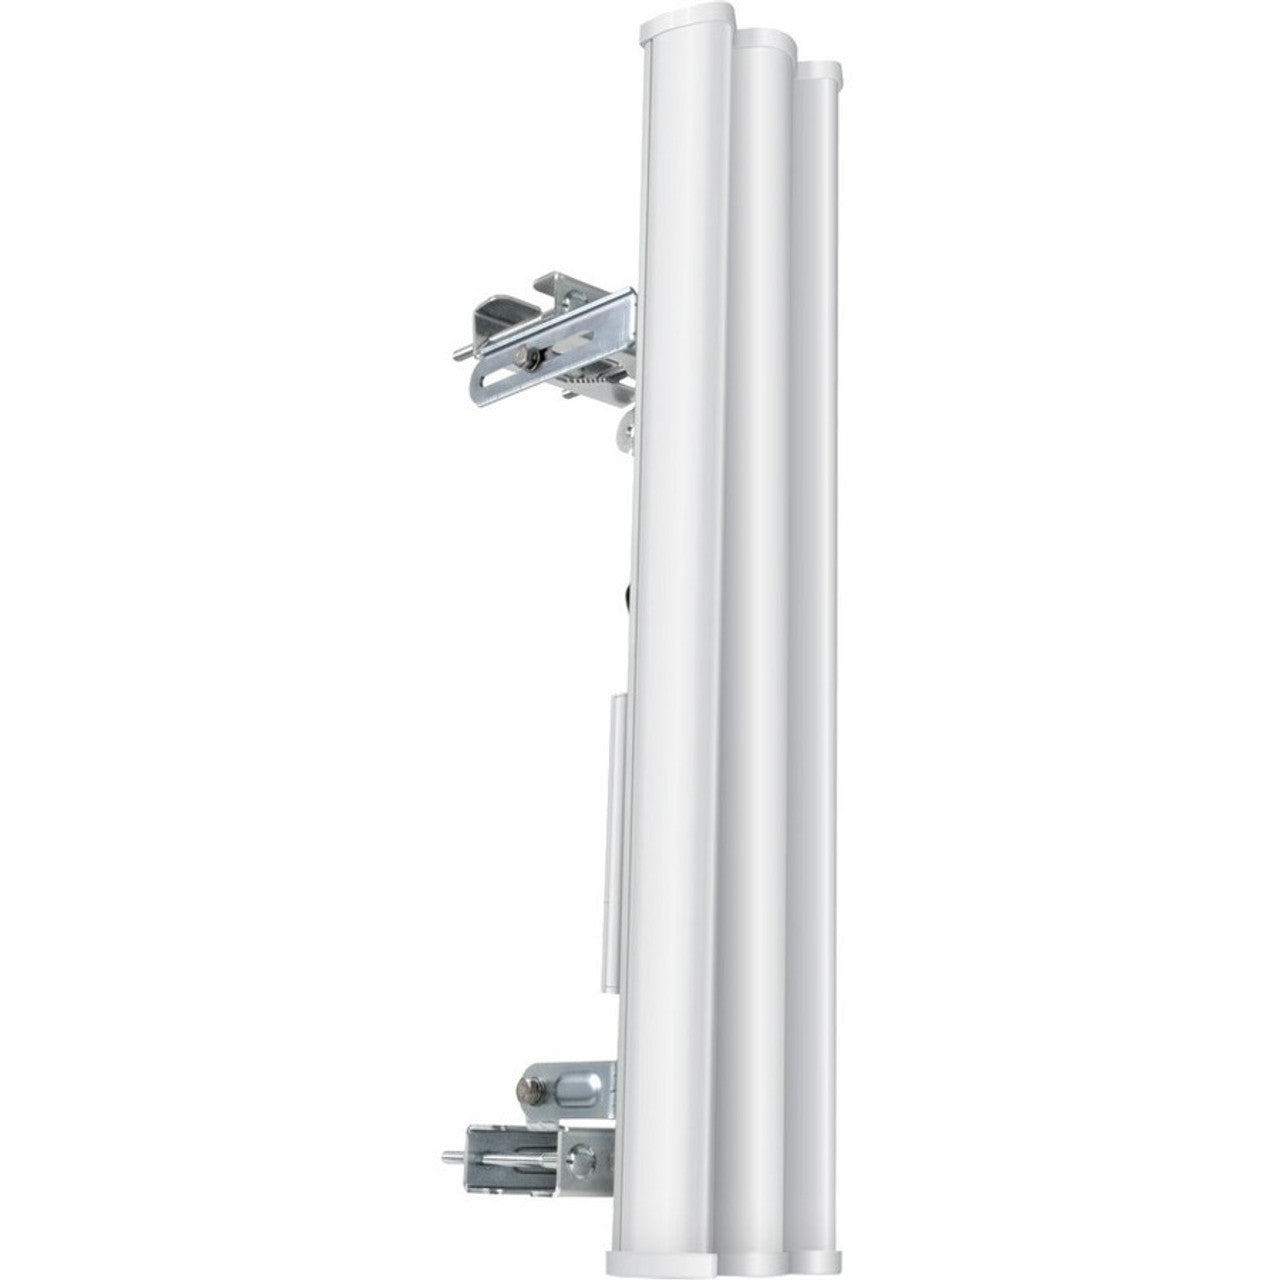 AM-5G19-120  2x2 MIMO BaseStation Sector Antenna